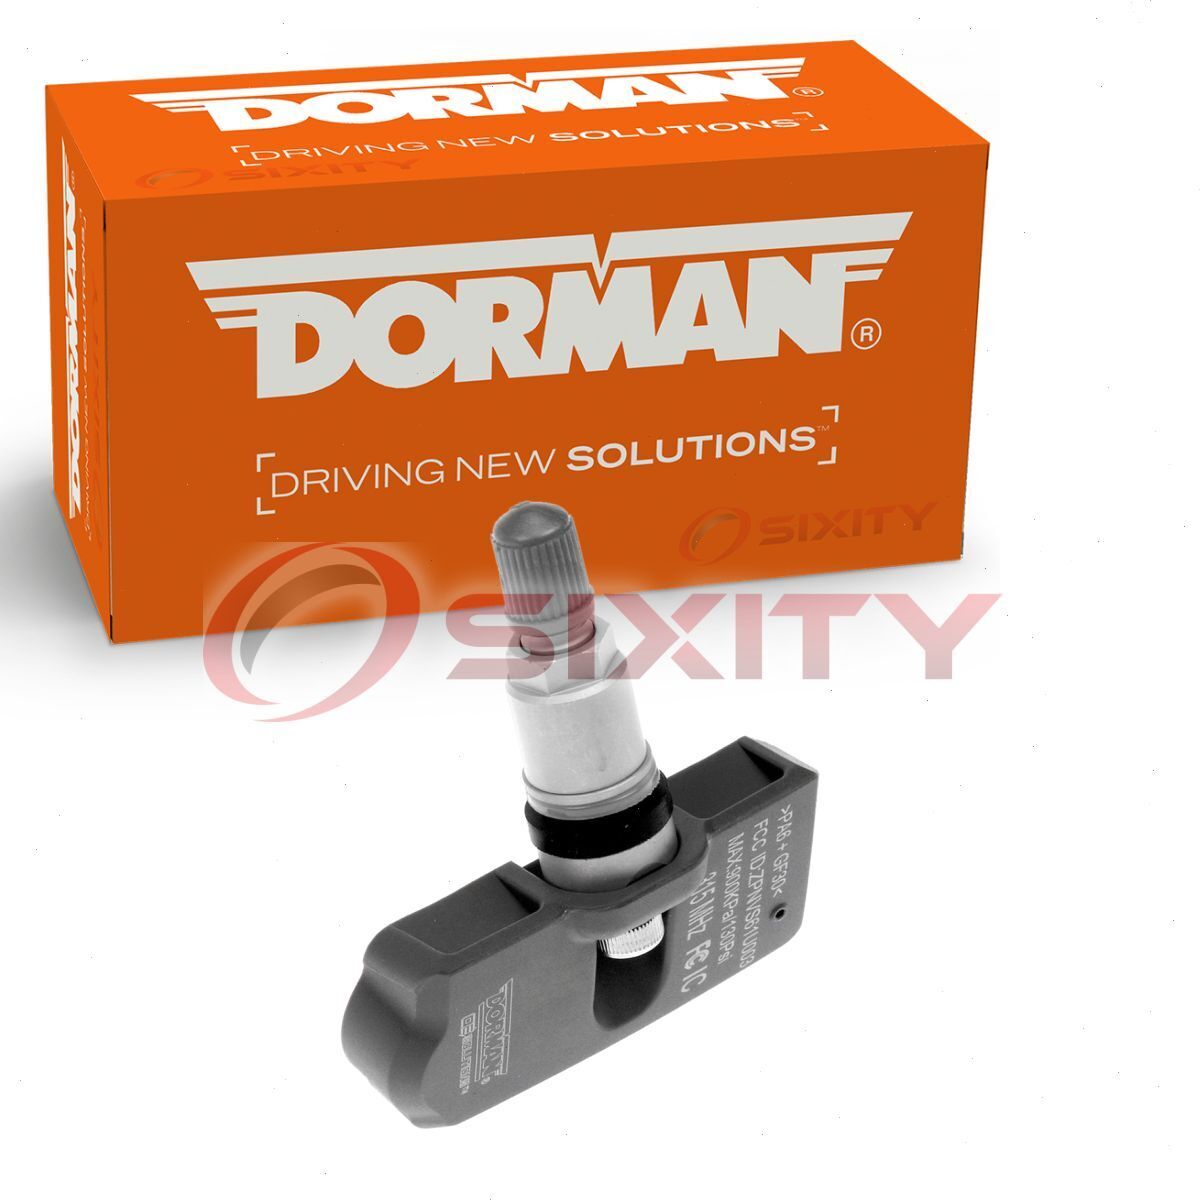 Dorman TPMS Programmable Sensor for 1999 BMW 323is Tire Pressure Monitoring zy